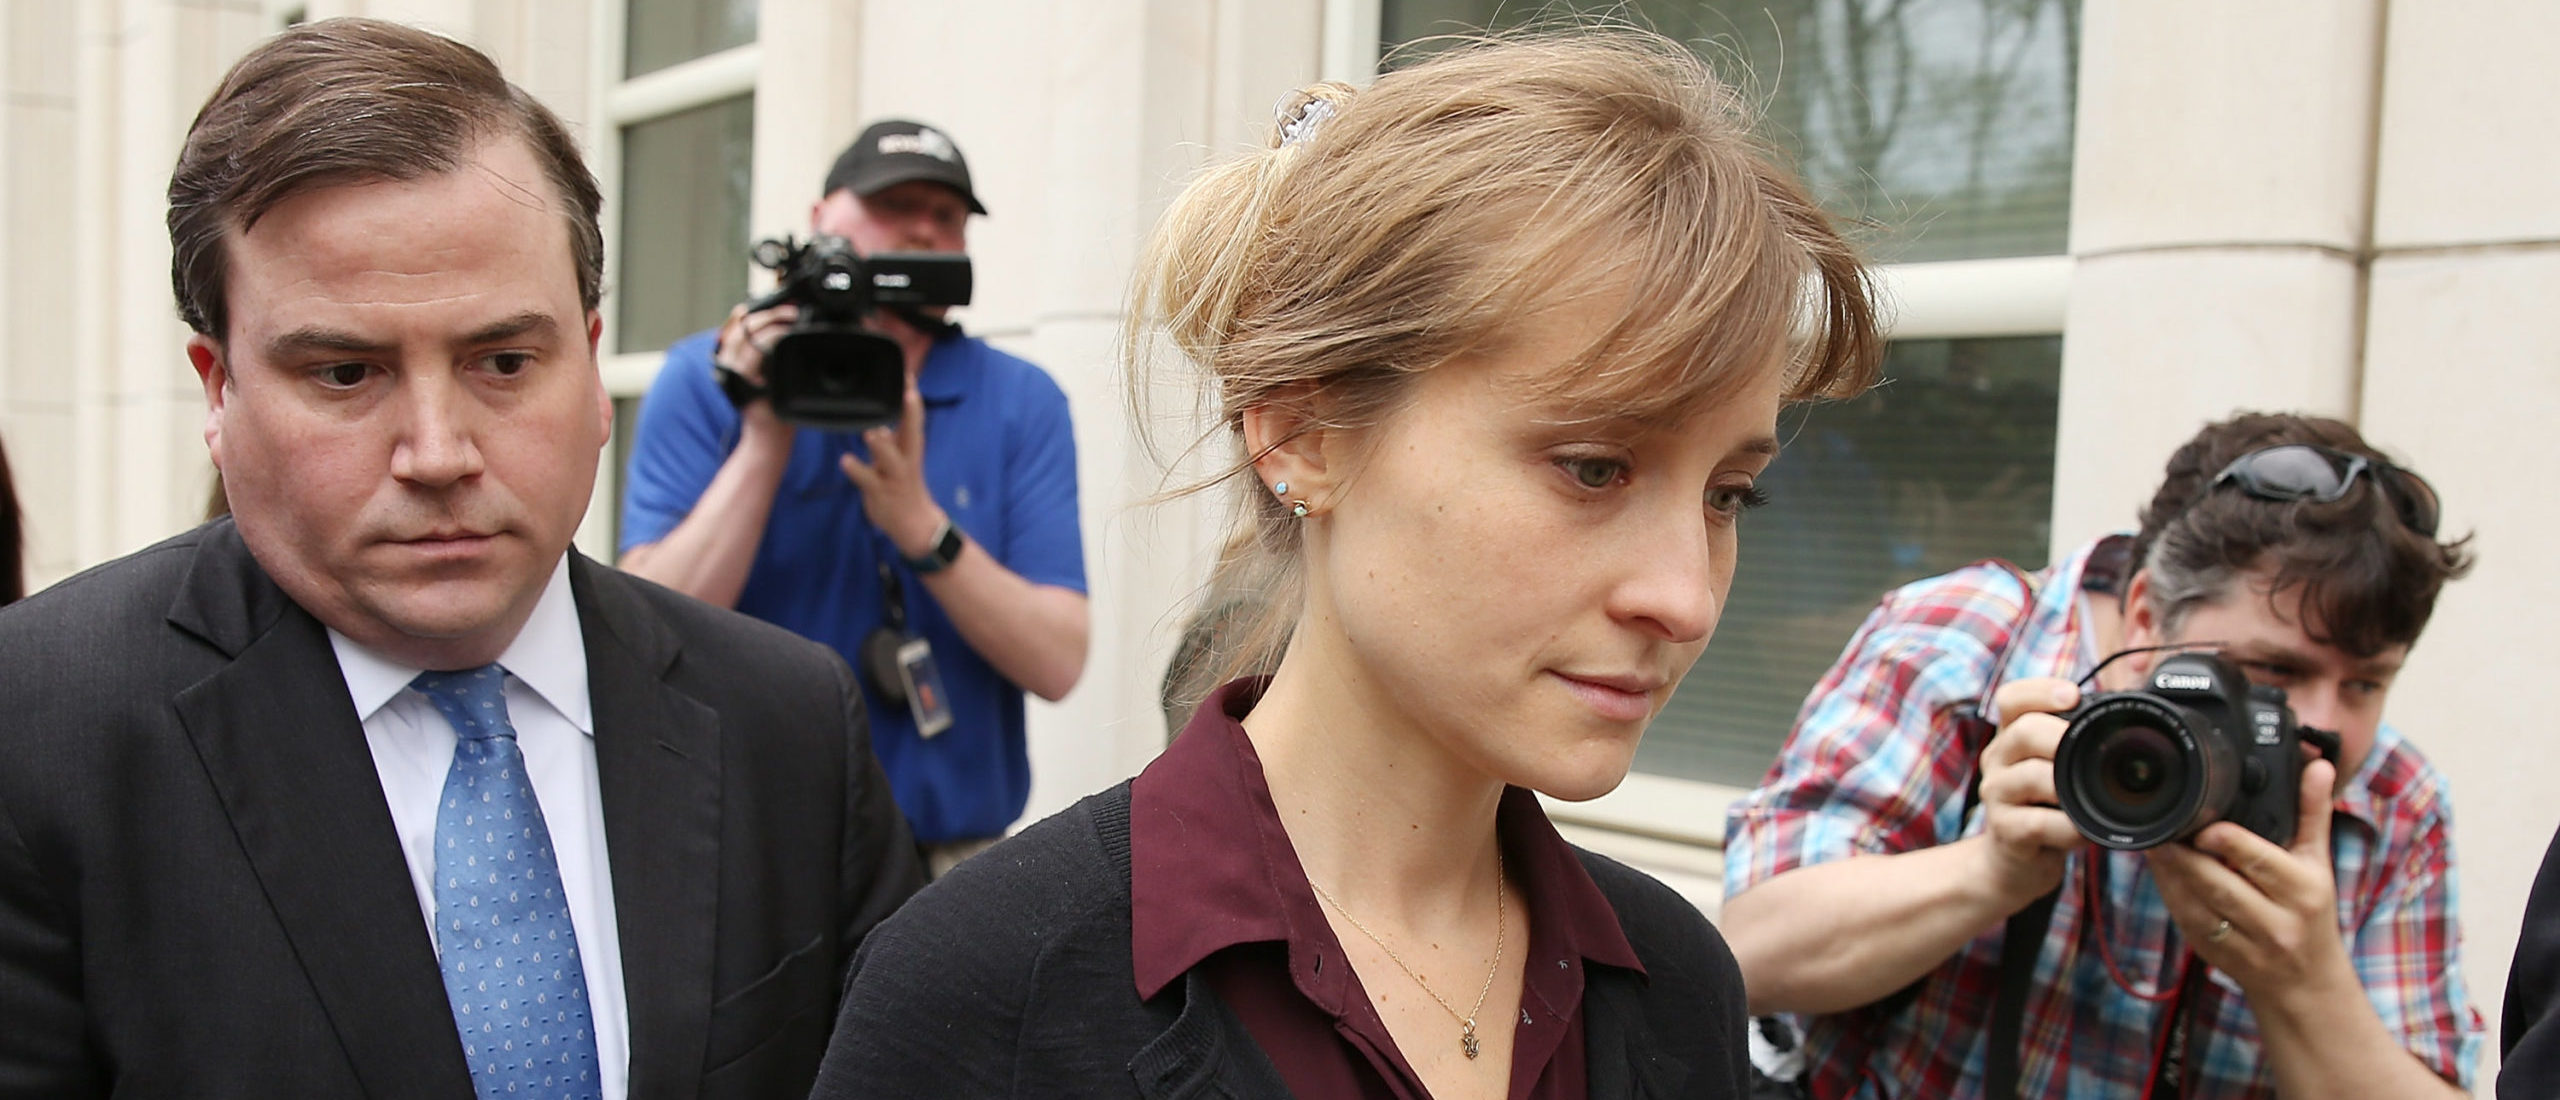 ‘smallville Actress Allison Mack Released From Prison After Sex Trafficking Cult Case The